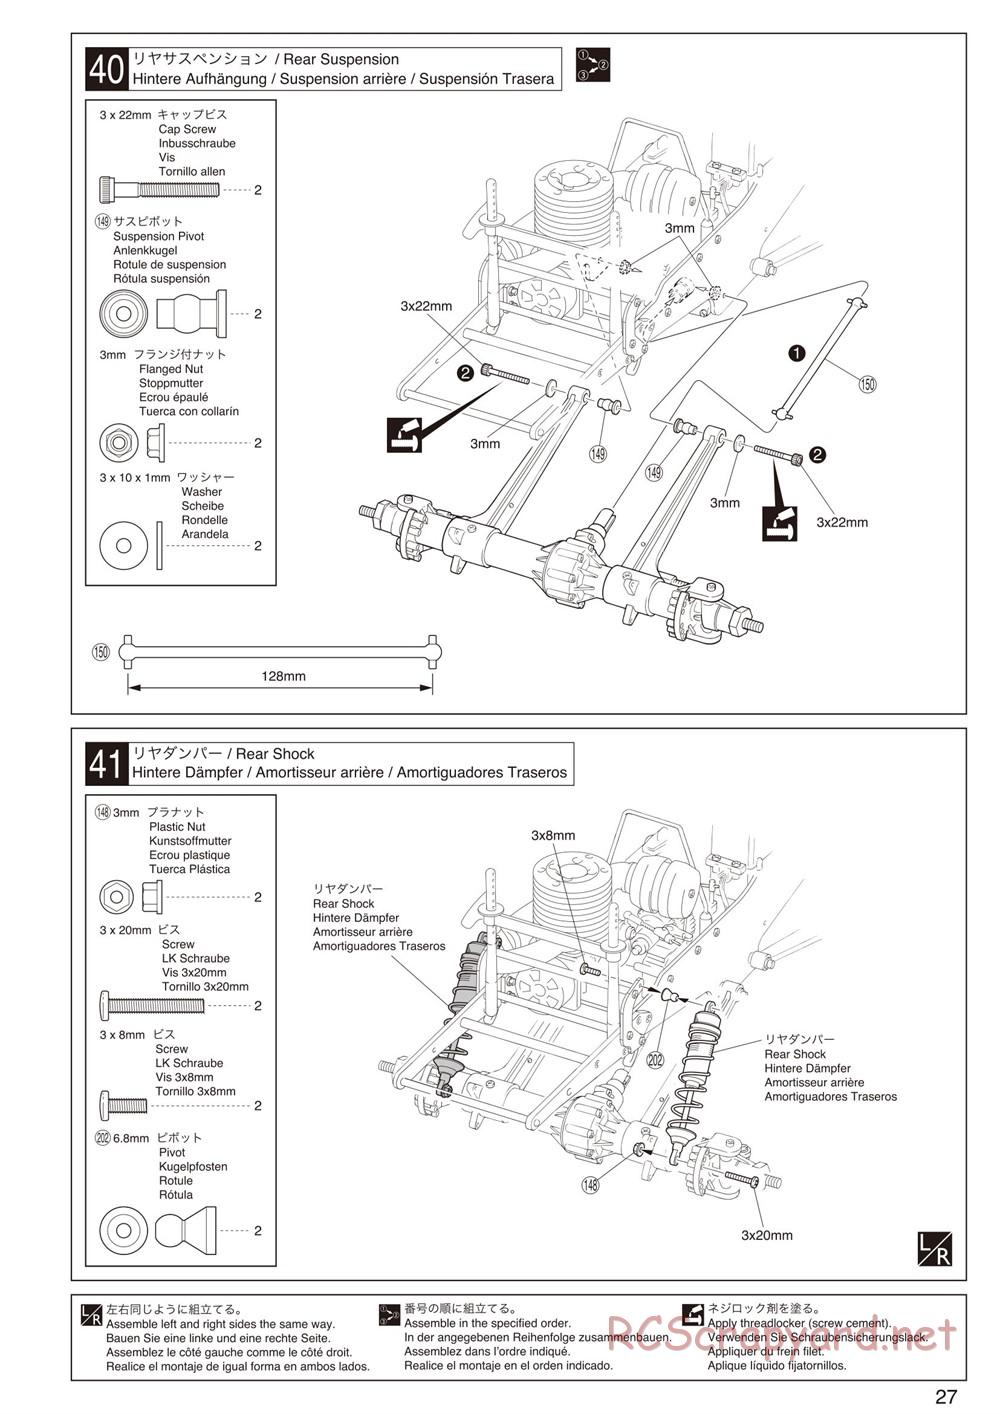 Kyosho - Mad Force Cruiser - Manual - Page 27